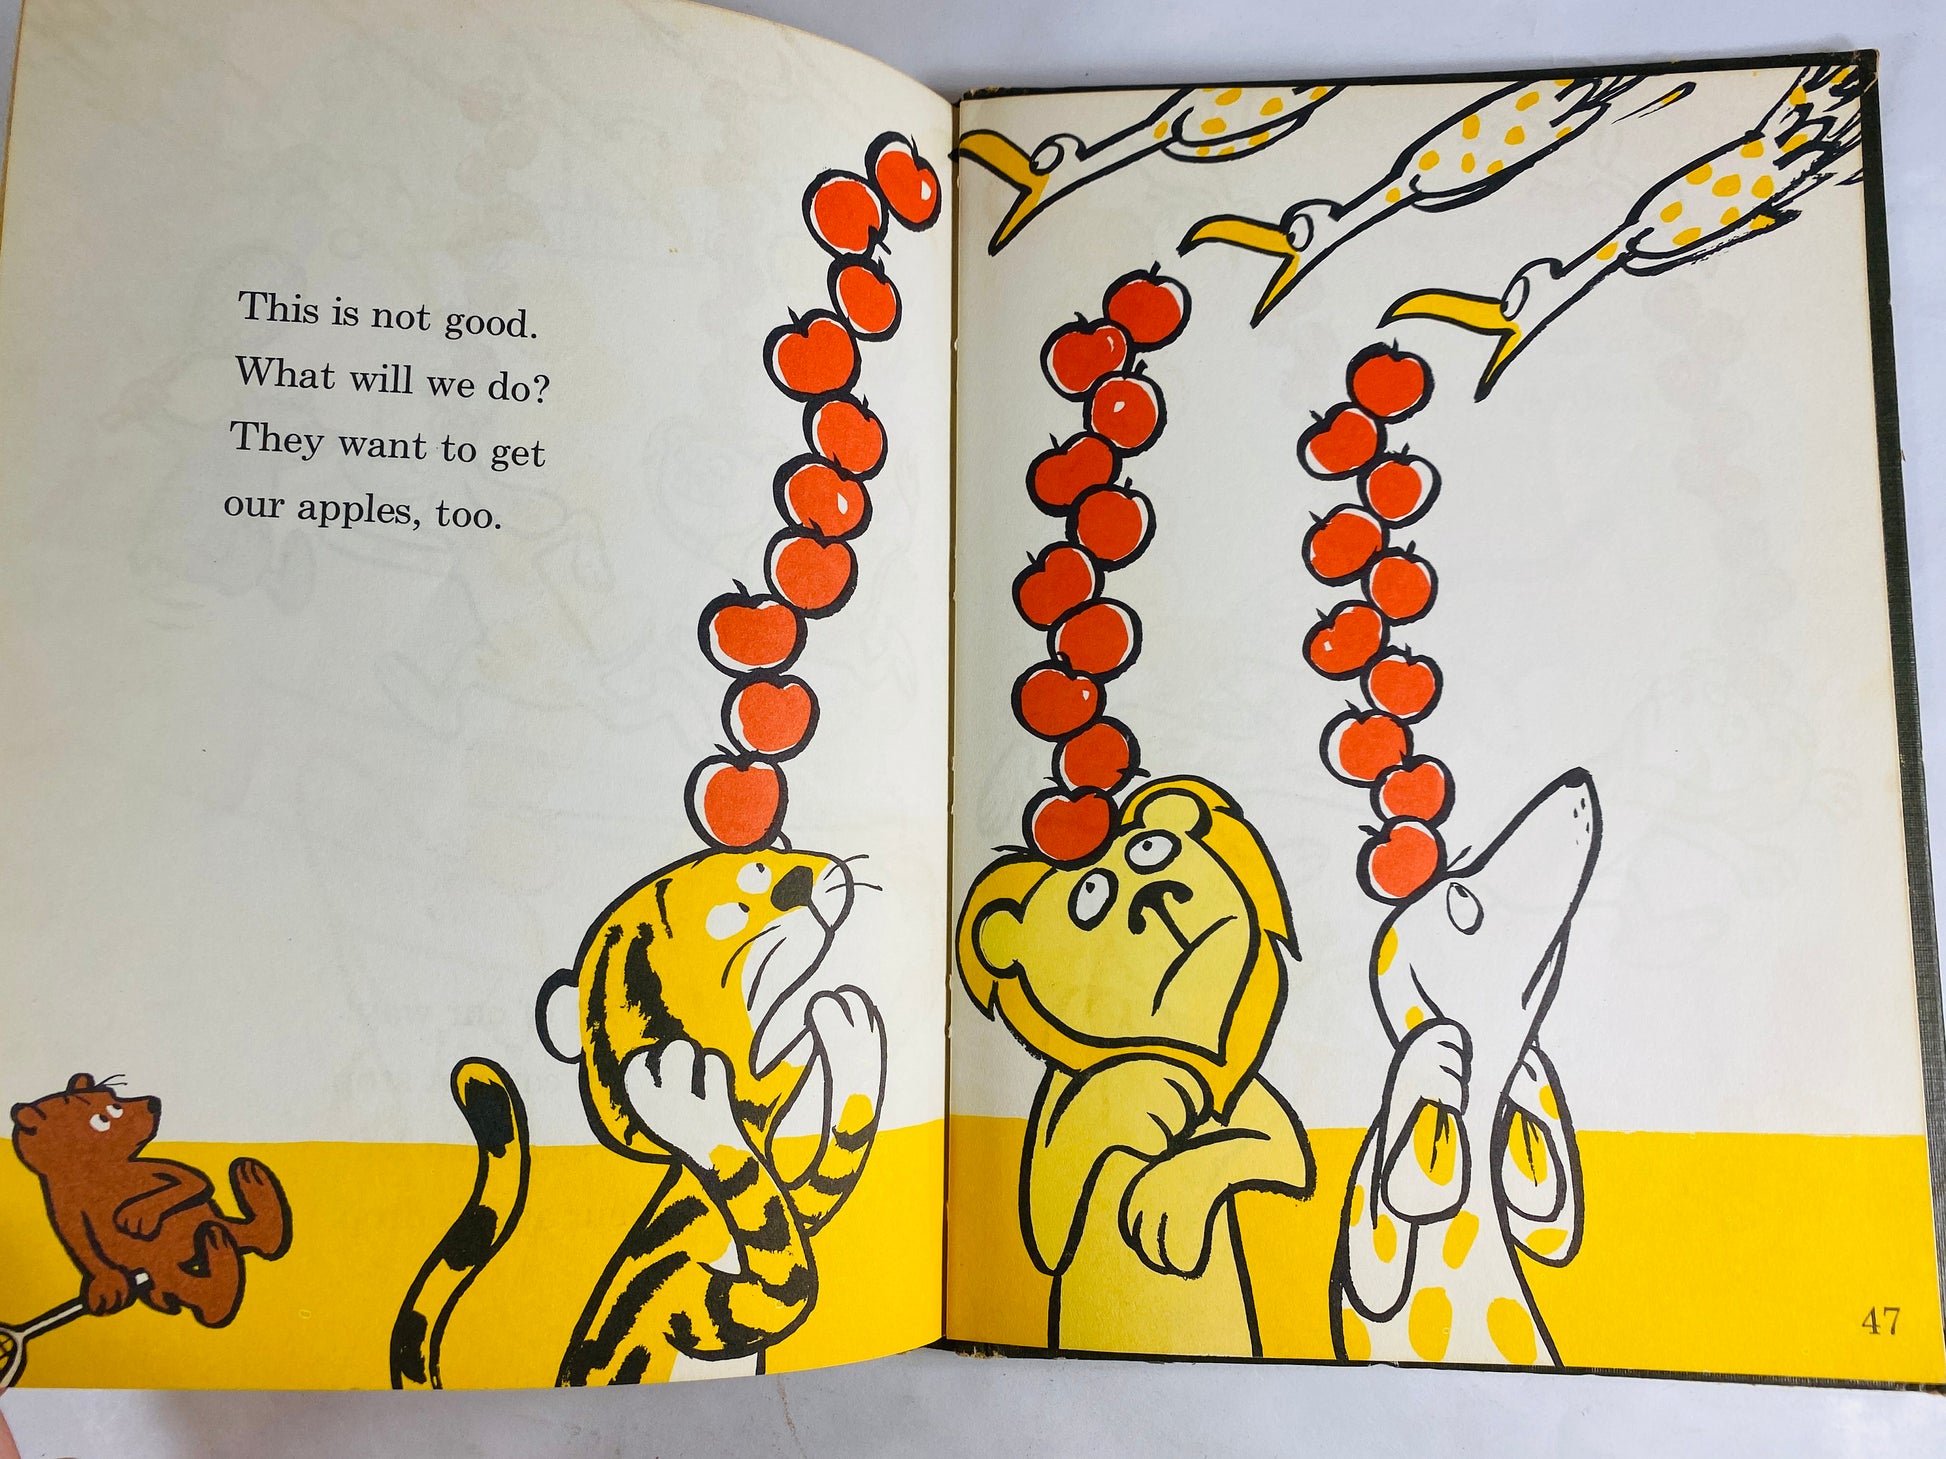 Ten Apples Up on Top vintage Dr Seuss book circa 1961 by Theodor Geisel collectible children's book early beginning reader BCE